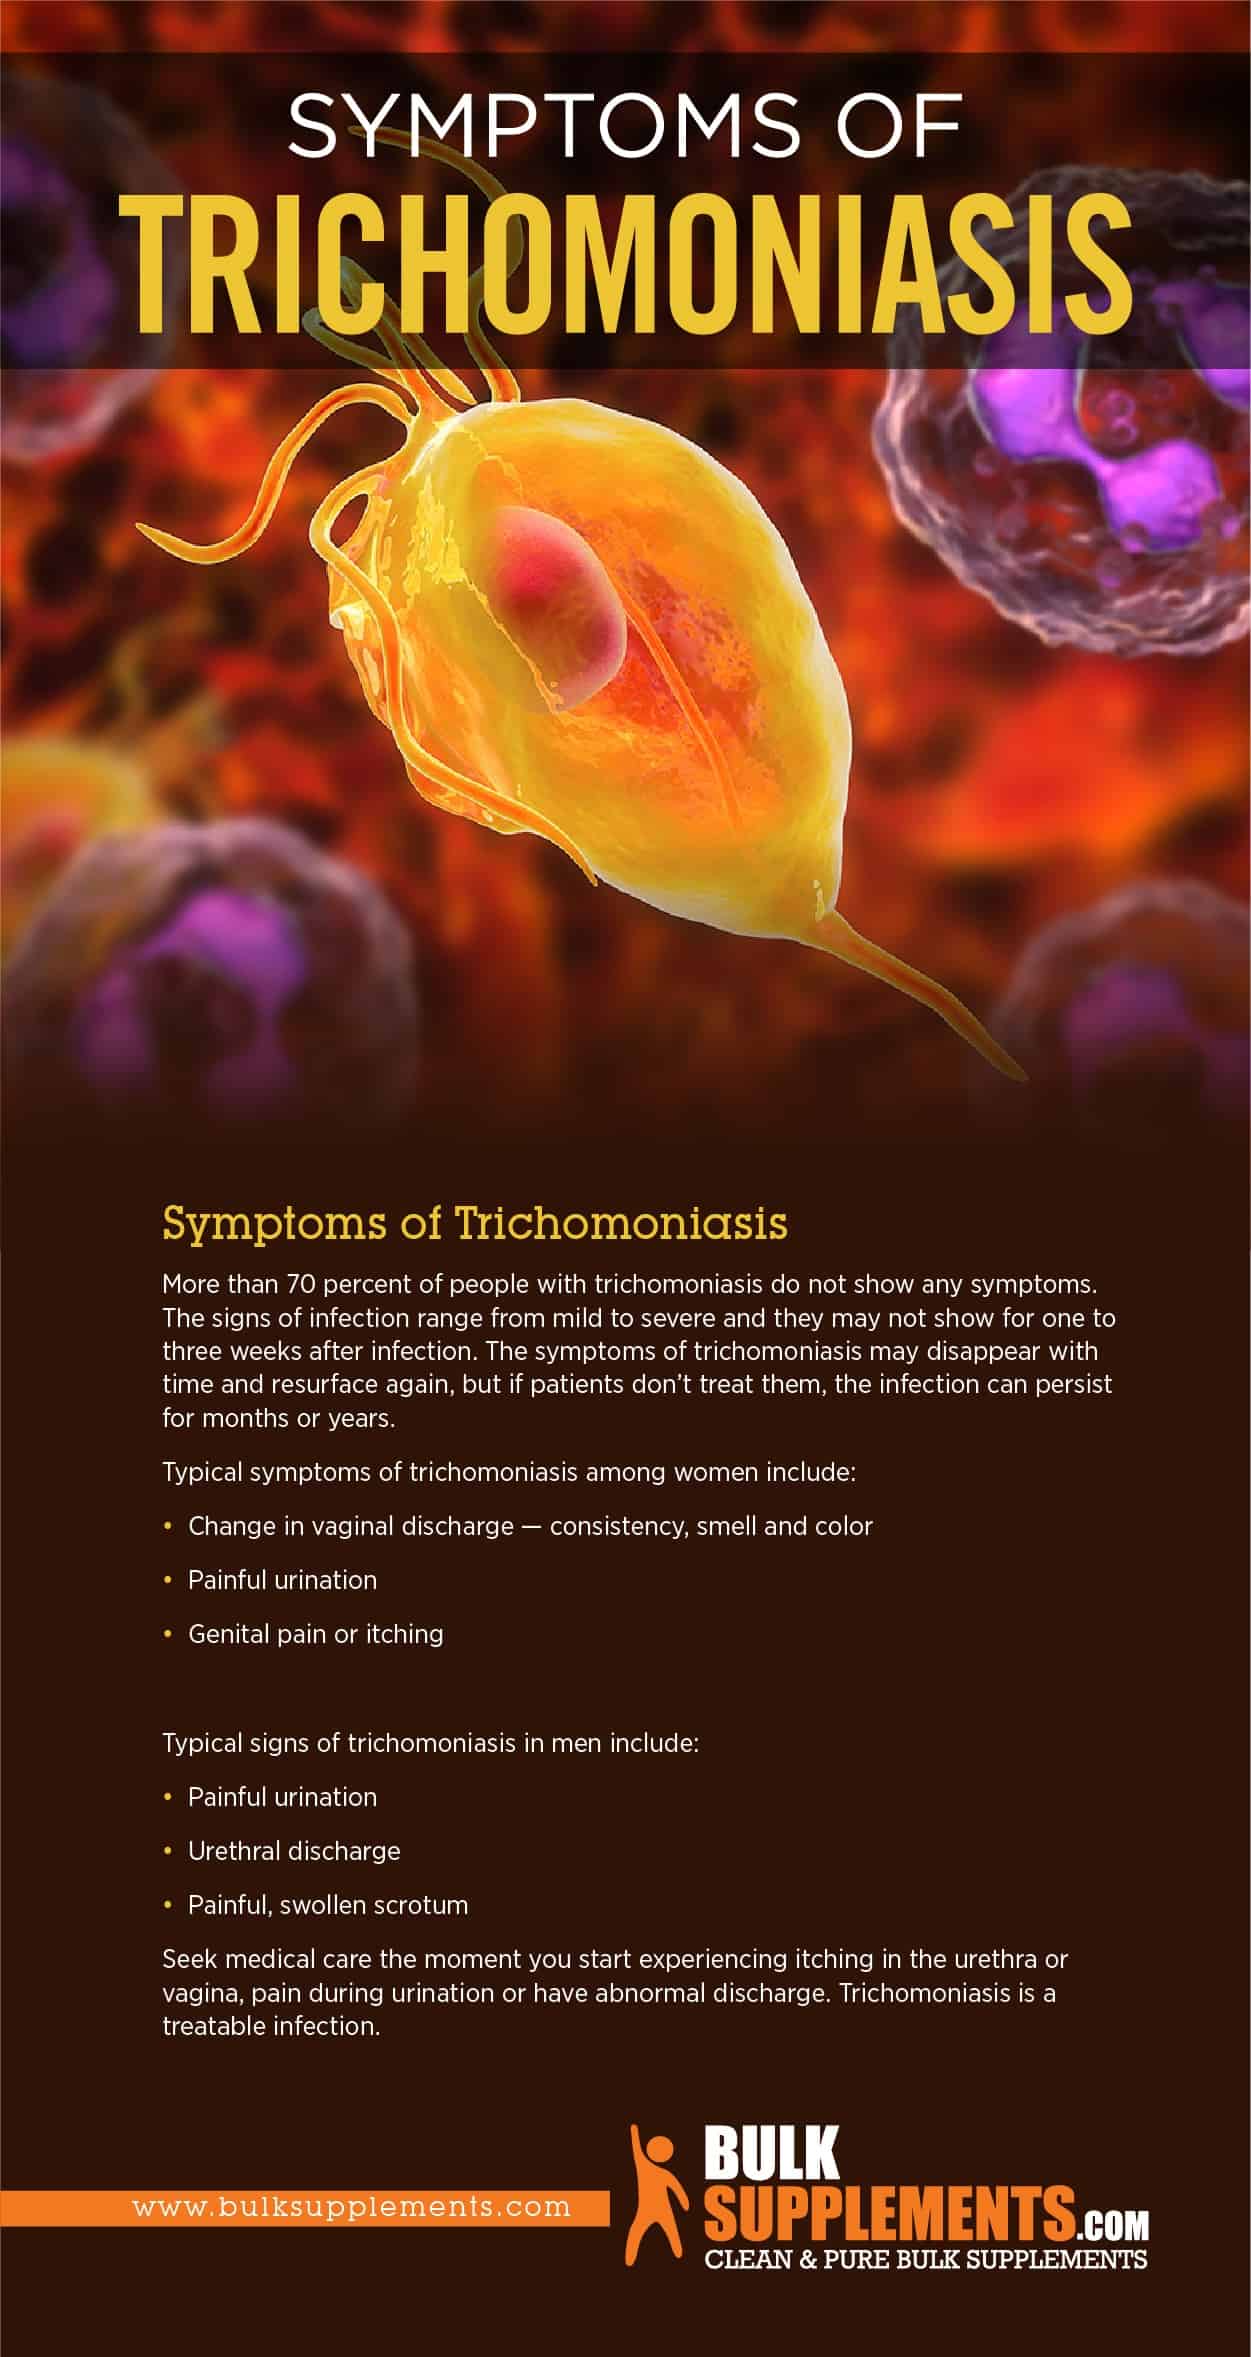 What is Trichomoniasis